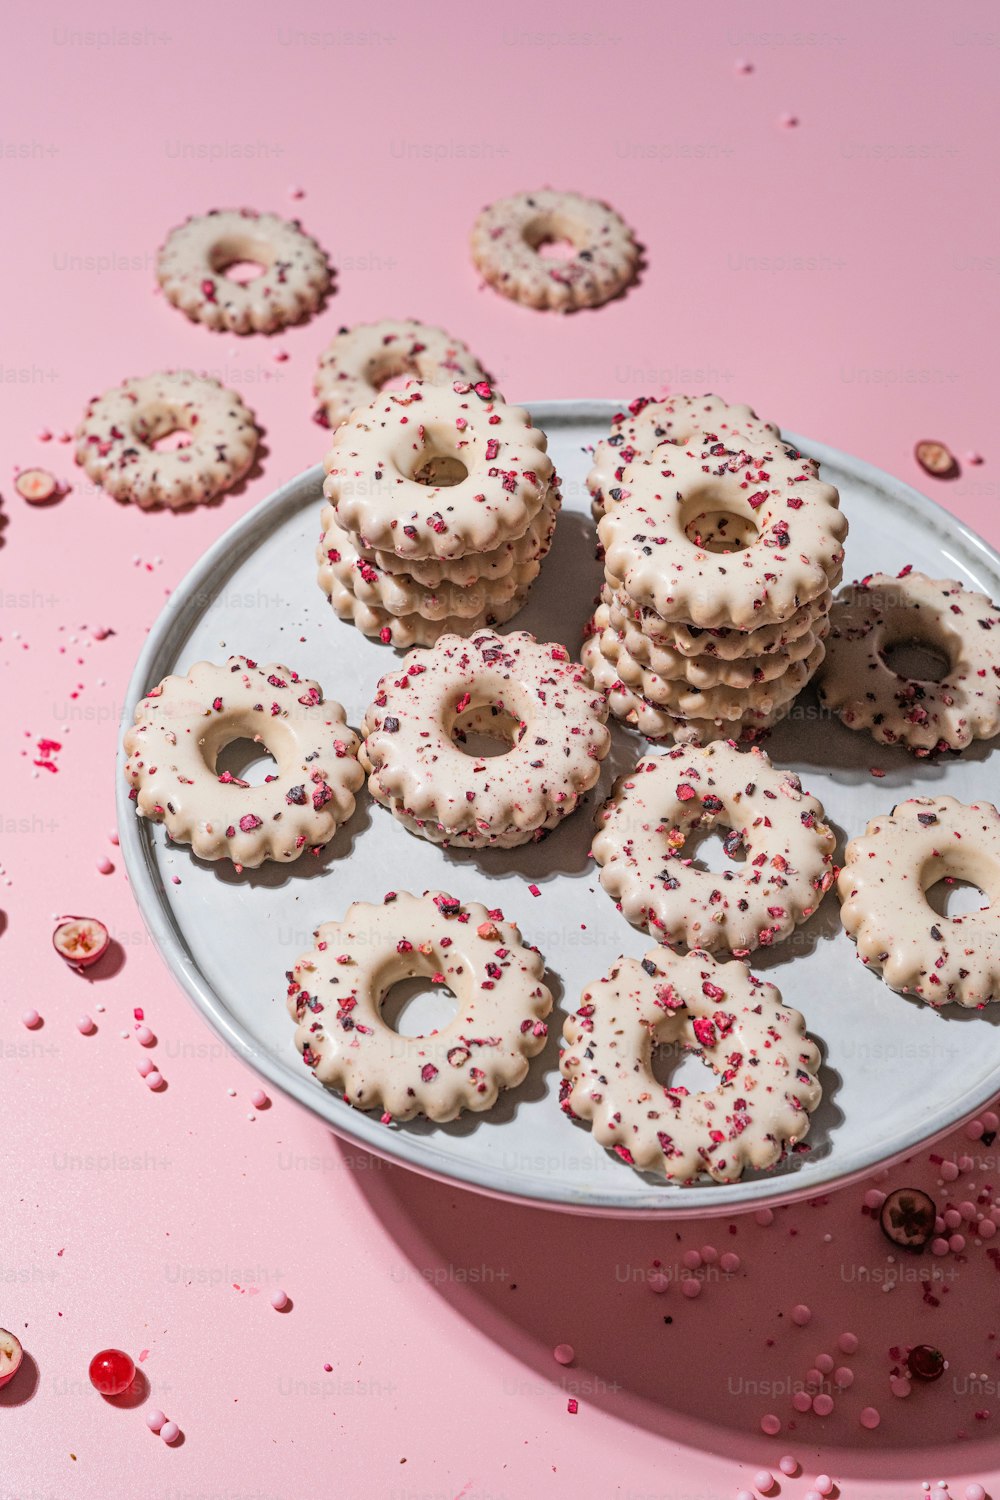 a plate of sprinkled donuts on a pink surface